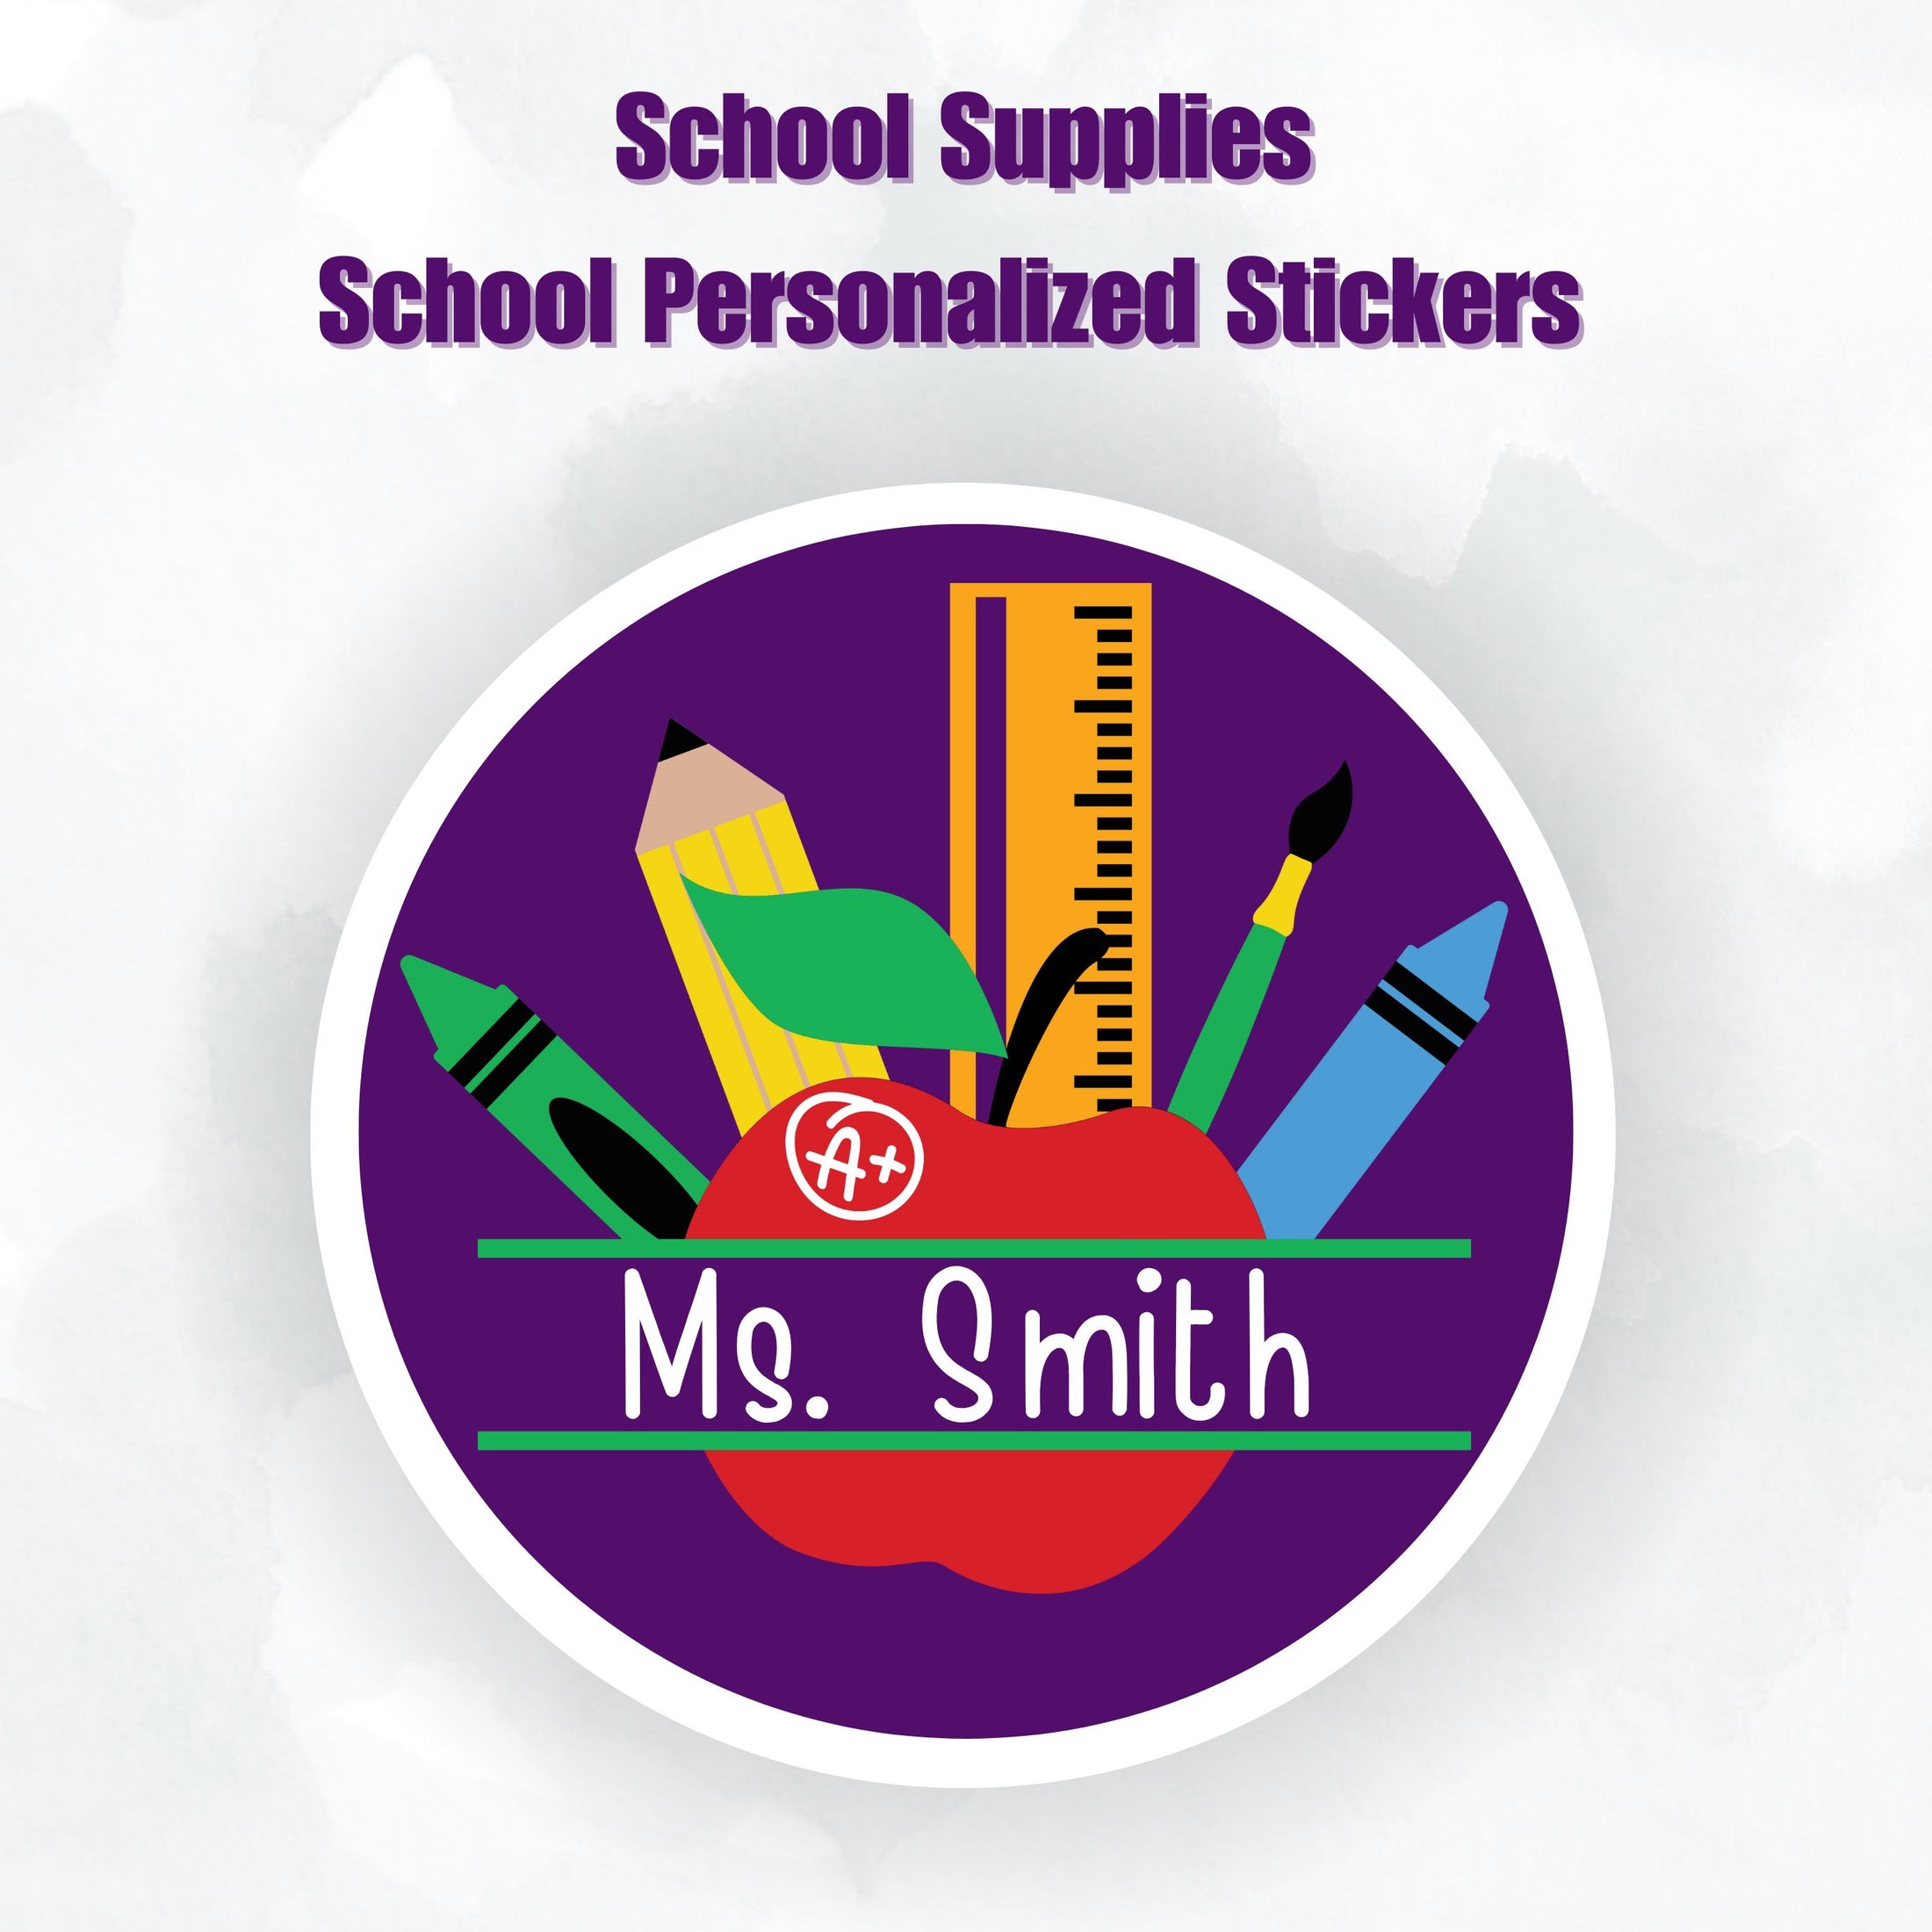 This cover image shows the personalized school sticker on a cloudy background.